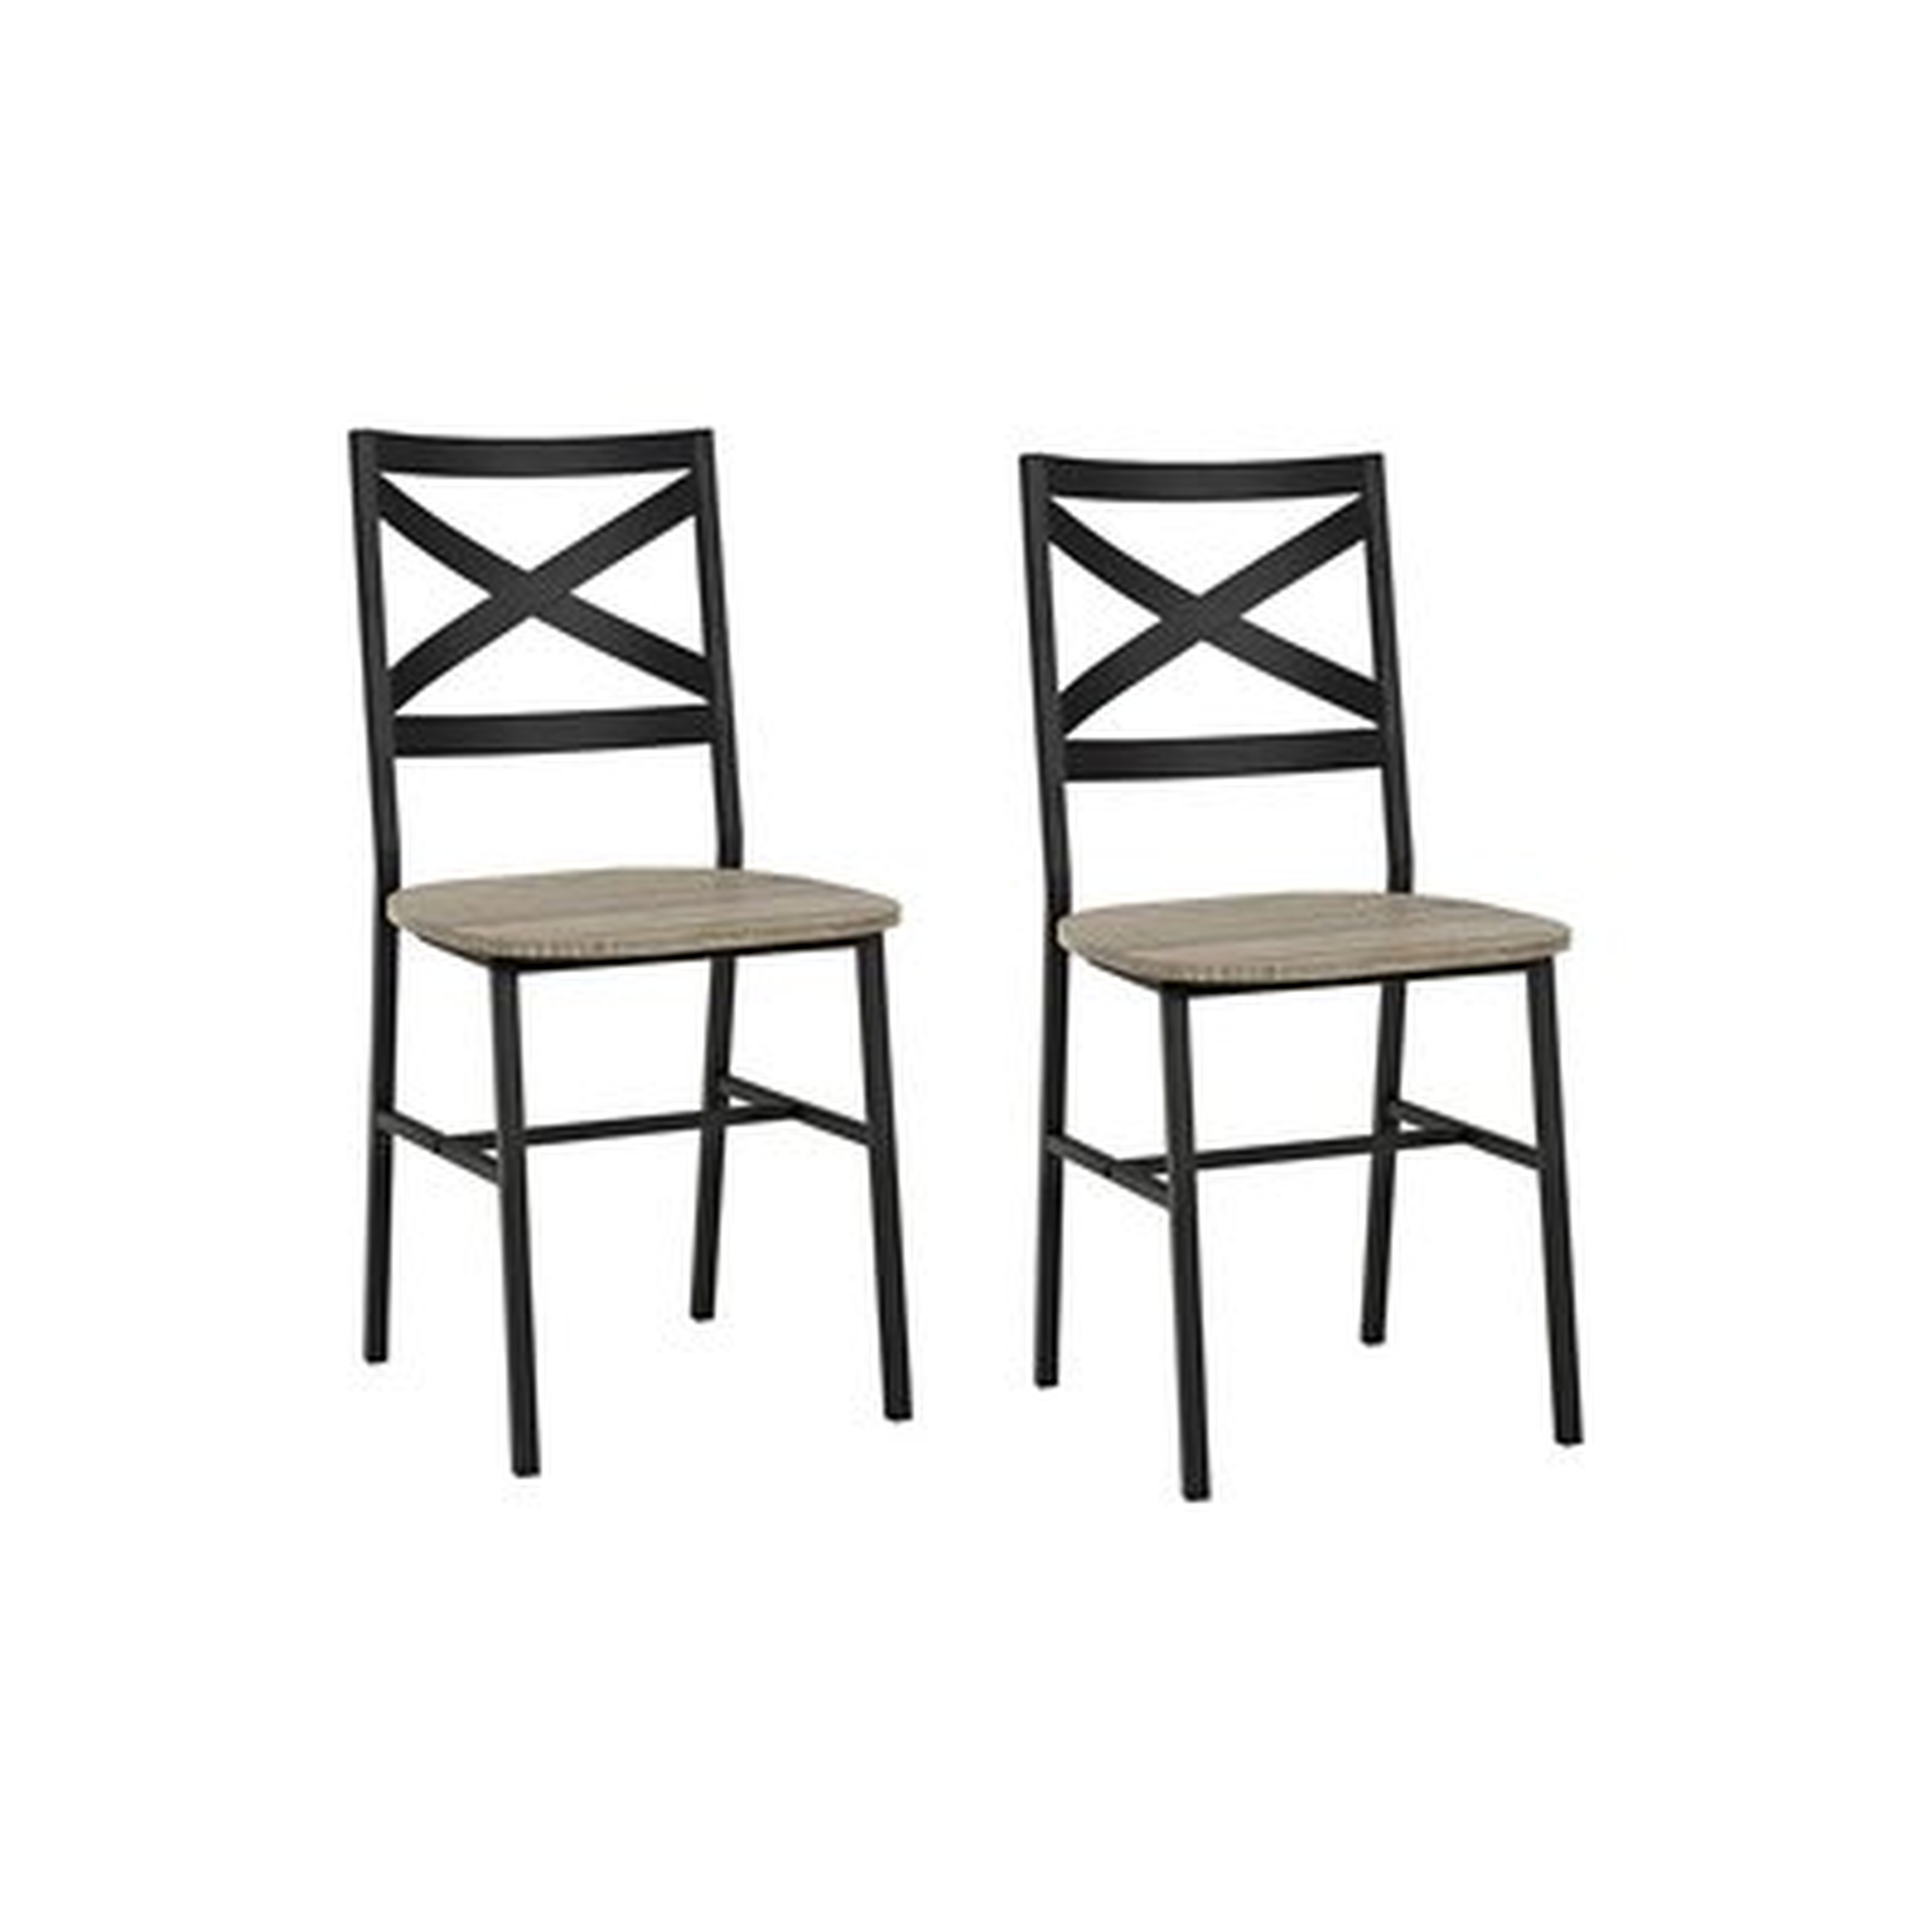 Madelyn Dining Chair- set of 2 - Wayfair